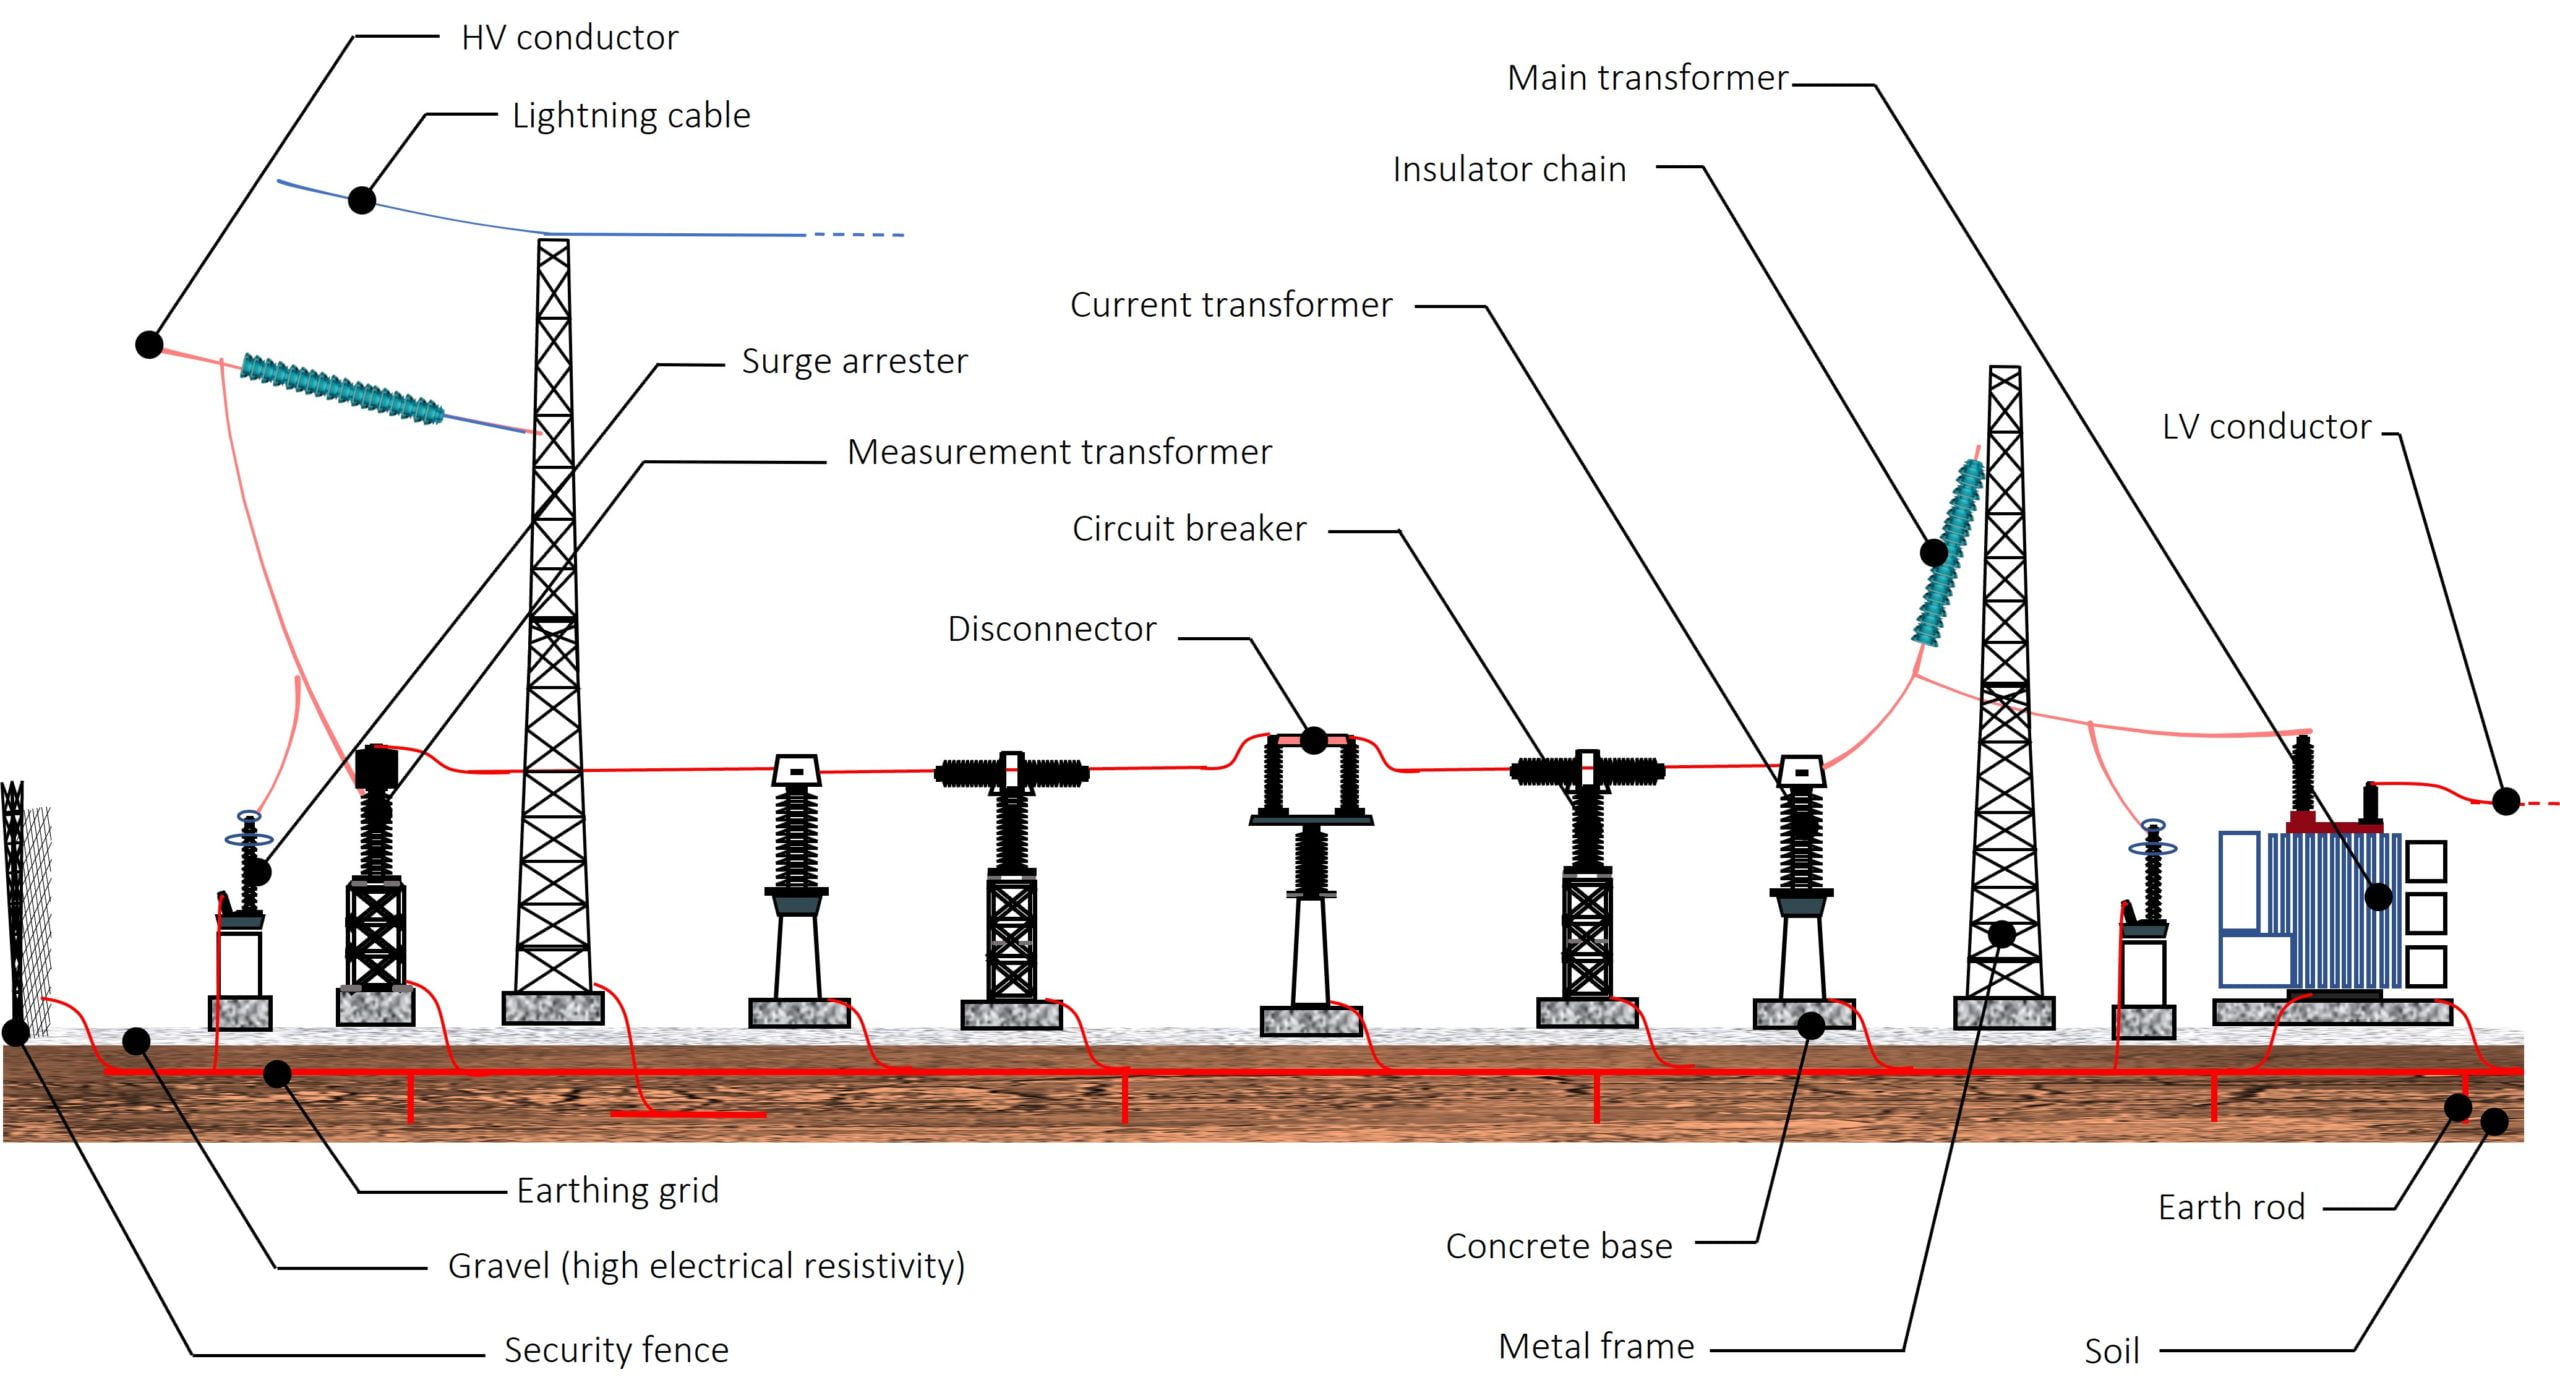 different types of electrical grids